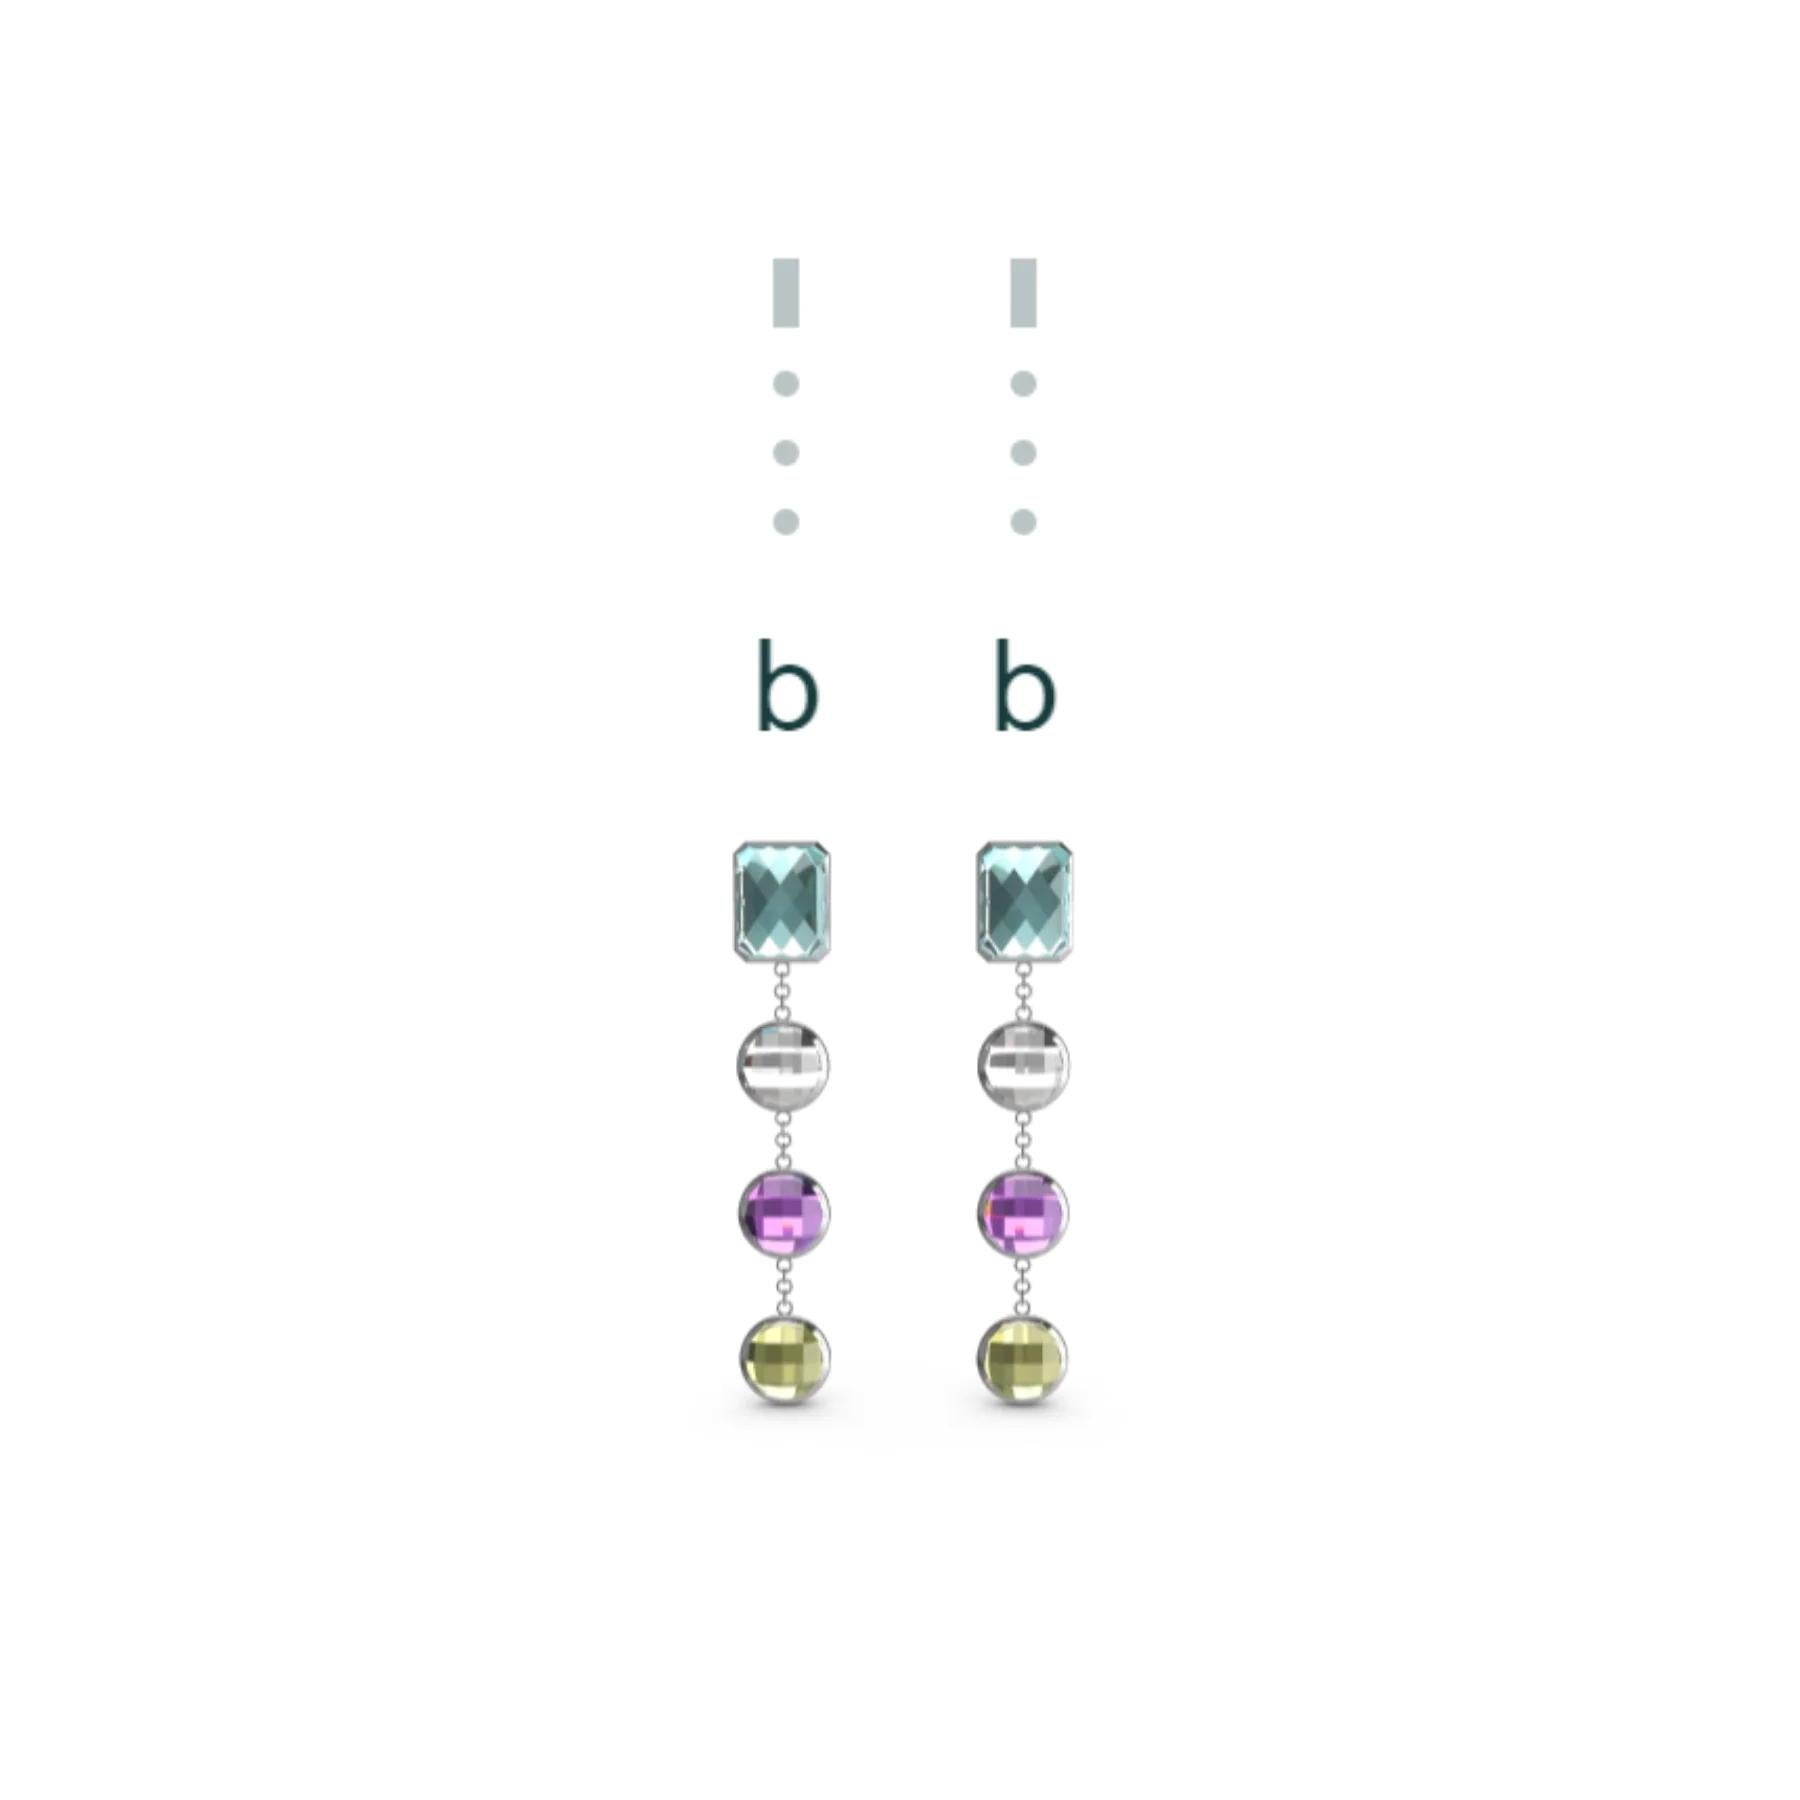 B is for Beauty, Believe, Bella… Encode the letters of your name, your children's initials, your lucky numbers, or a secret message of inspiration.

Details of this piece:
Handcrafted
Recycled 925 sterling silver

About Us
In the intricate dance of